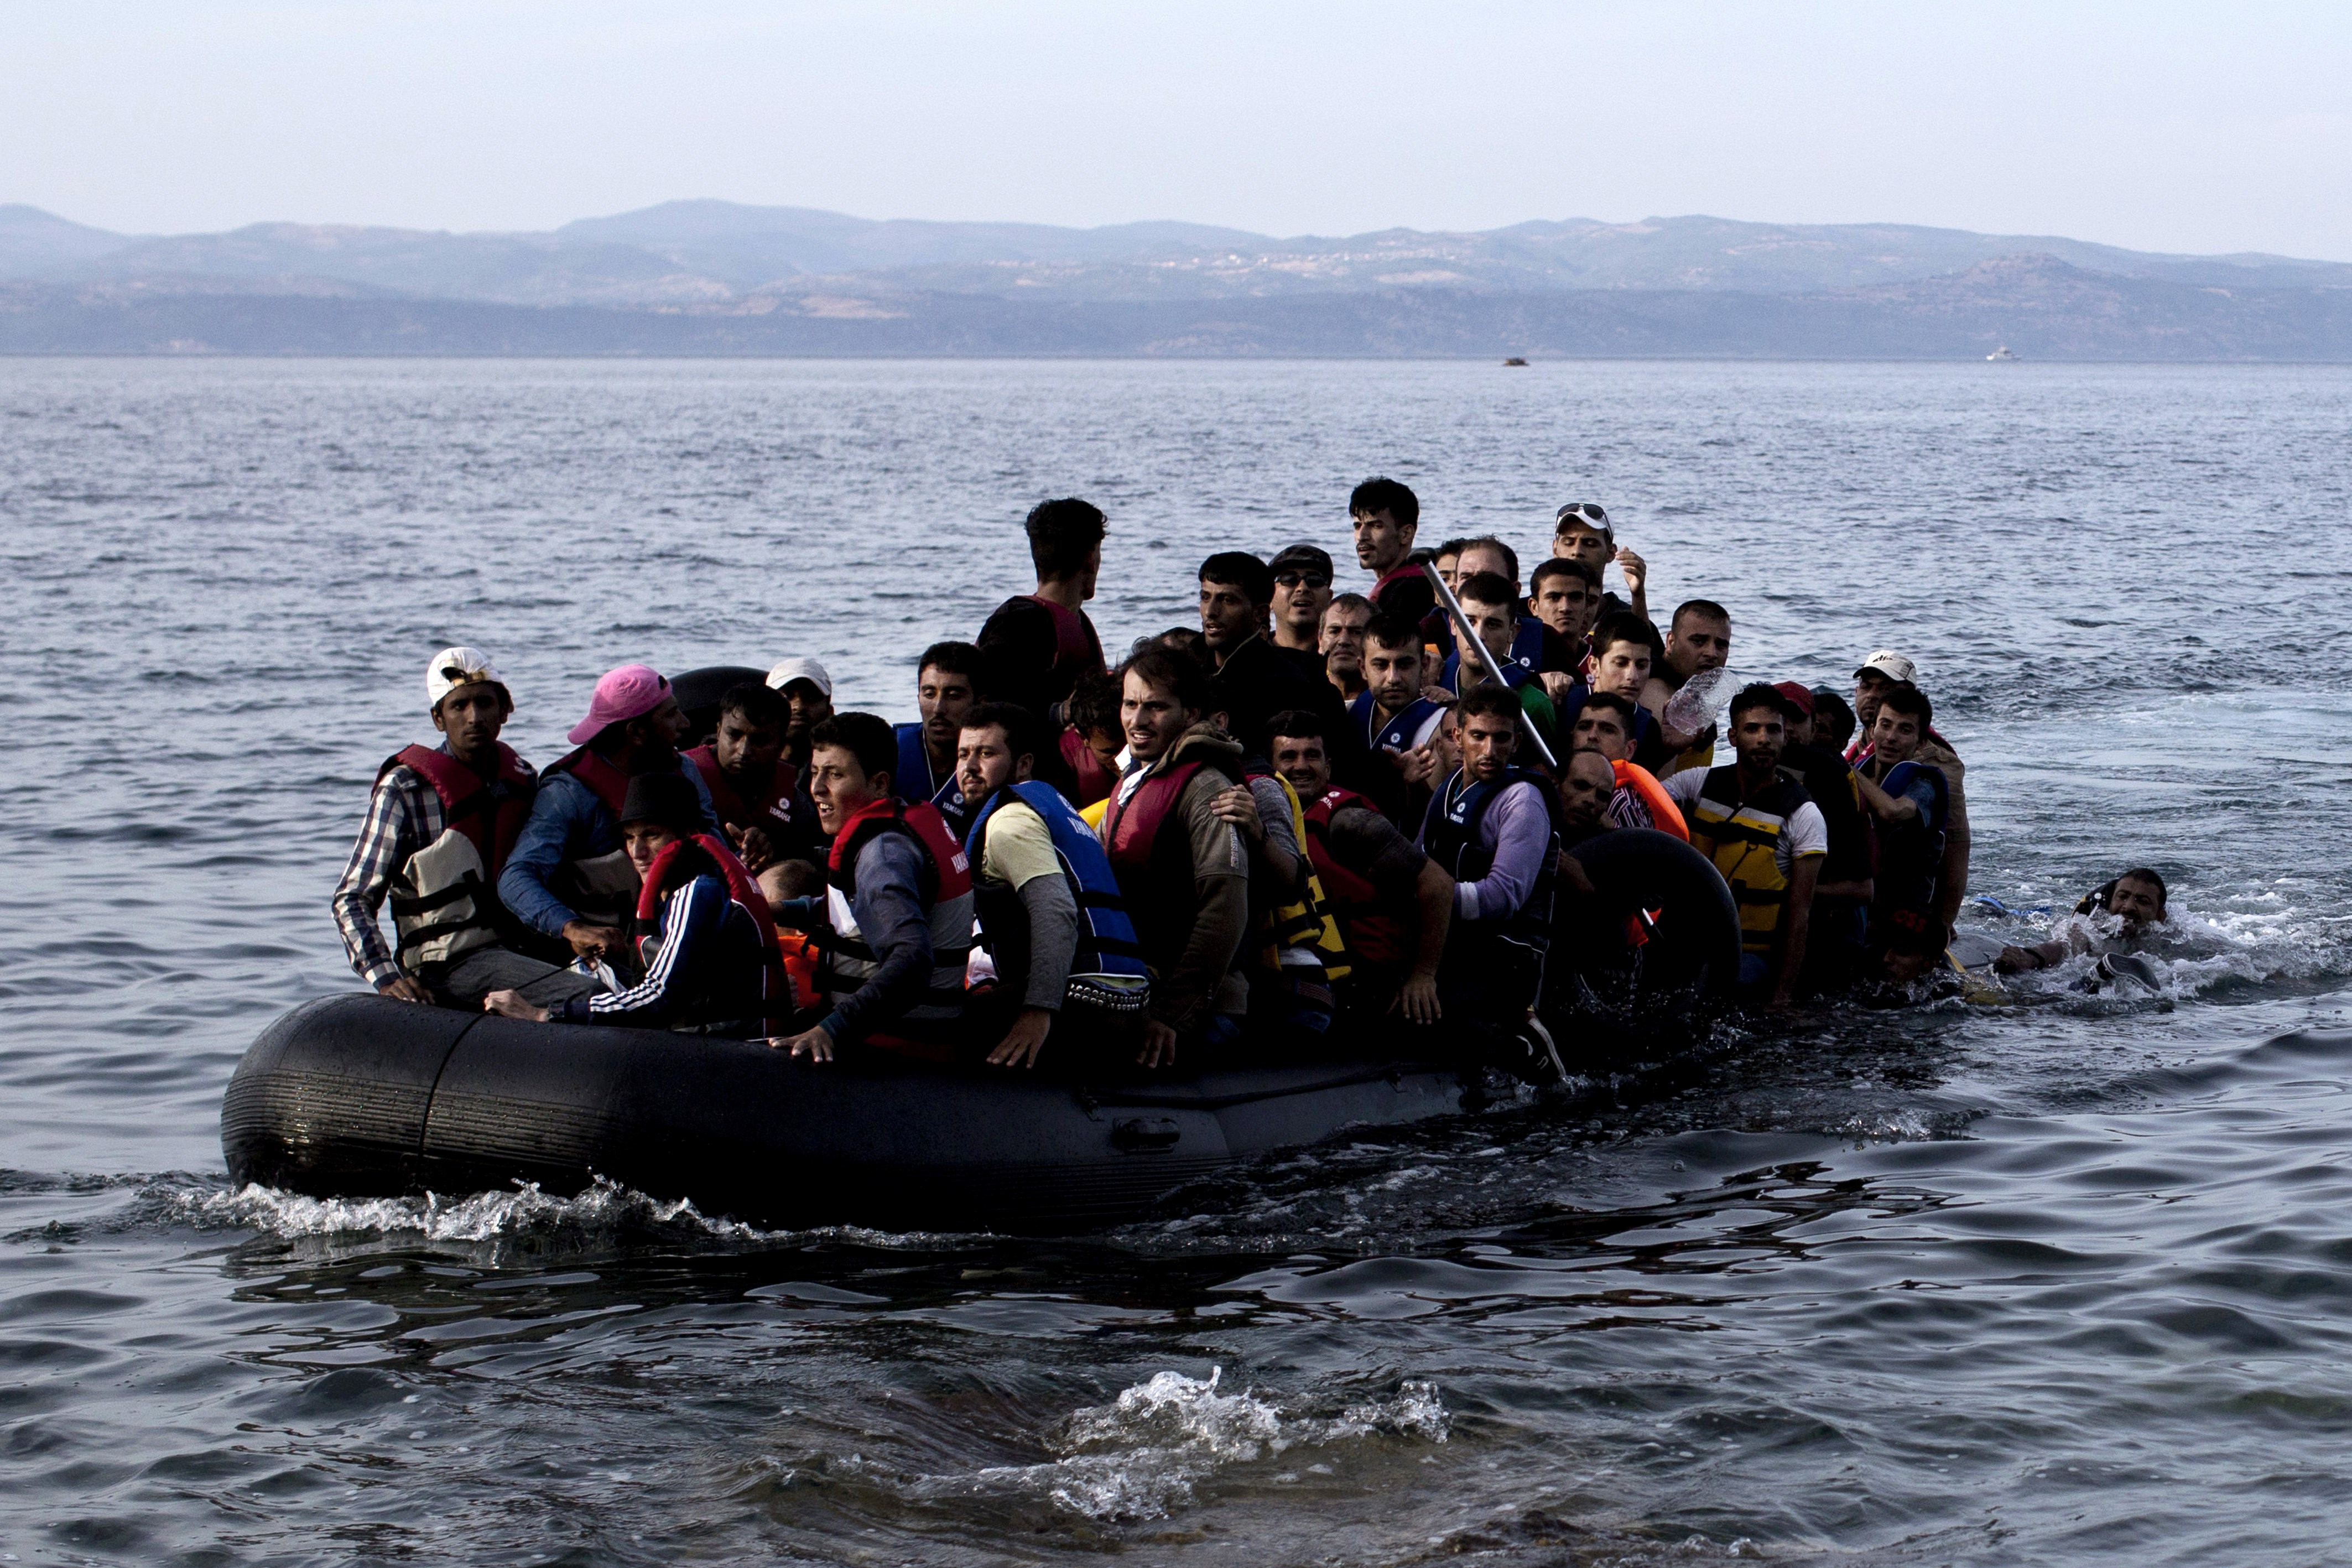 Refugees and migrants arrive on the shores of the Greek island of Lesbos after crossing the Aegean Sea from Turkey on an inflatable boat, Sept. 9, 2015. (Angelos Tzortzinis—AFP/Getty Images)